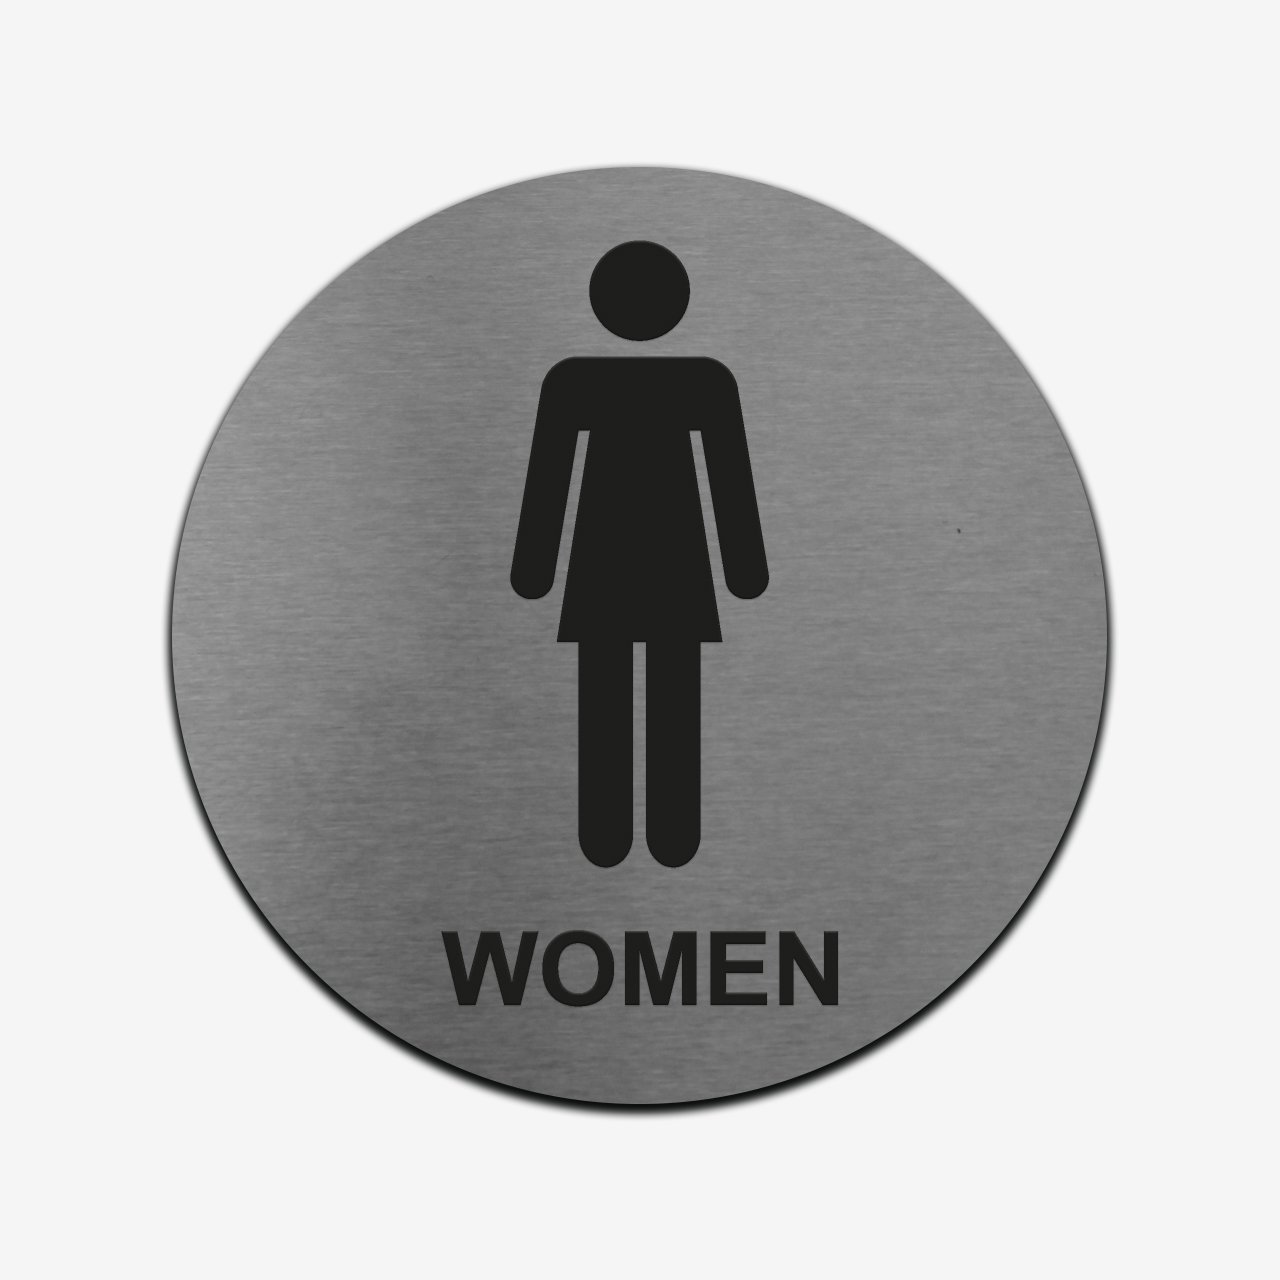 Woman WC - Stainless Steel Sign Bathroom Signs circle Bsign